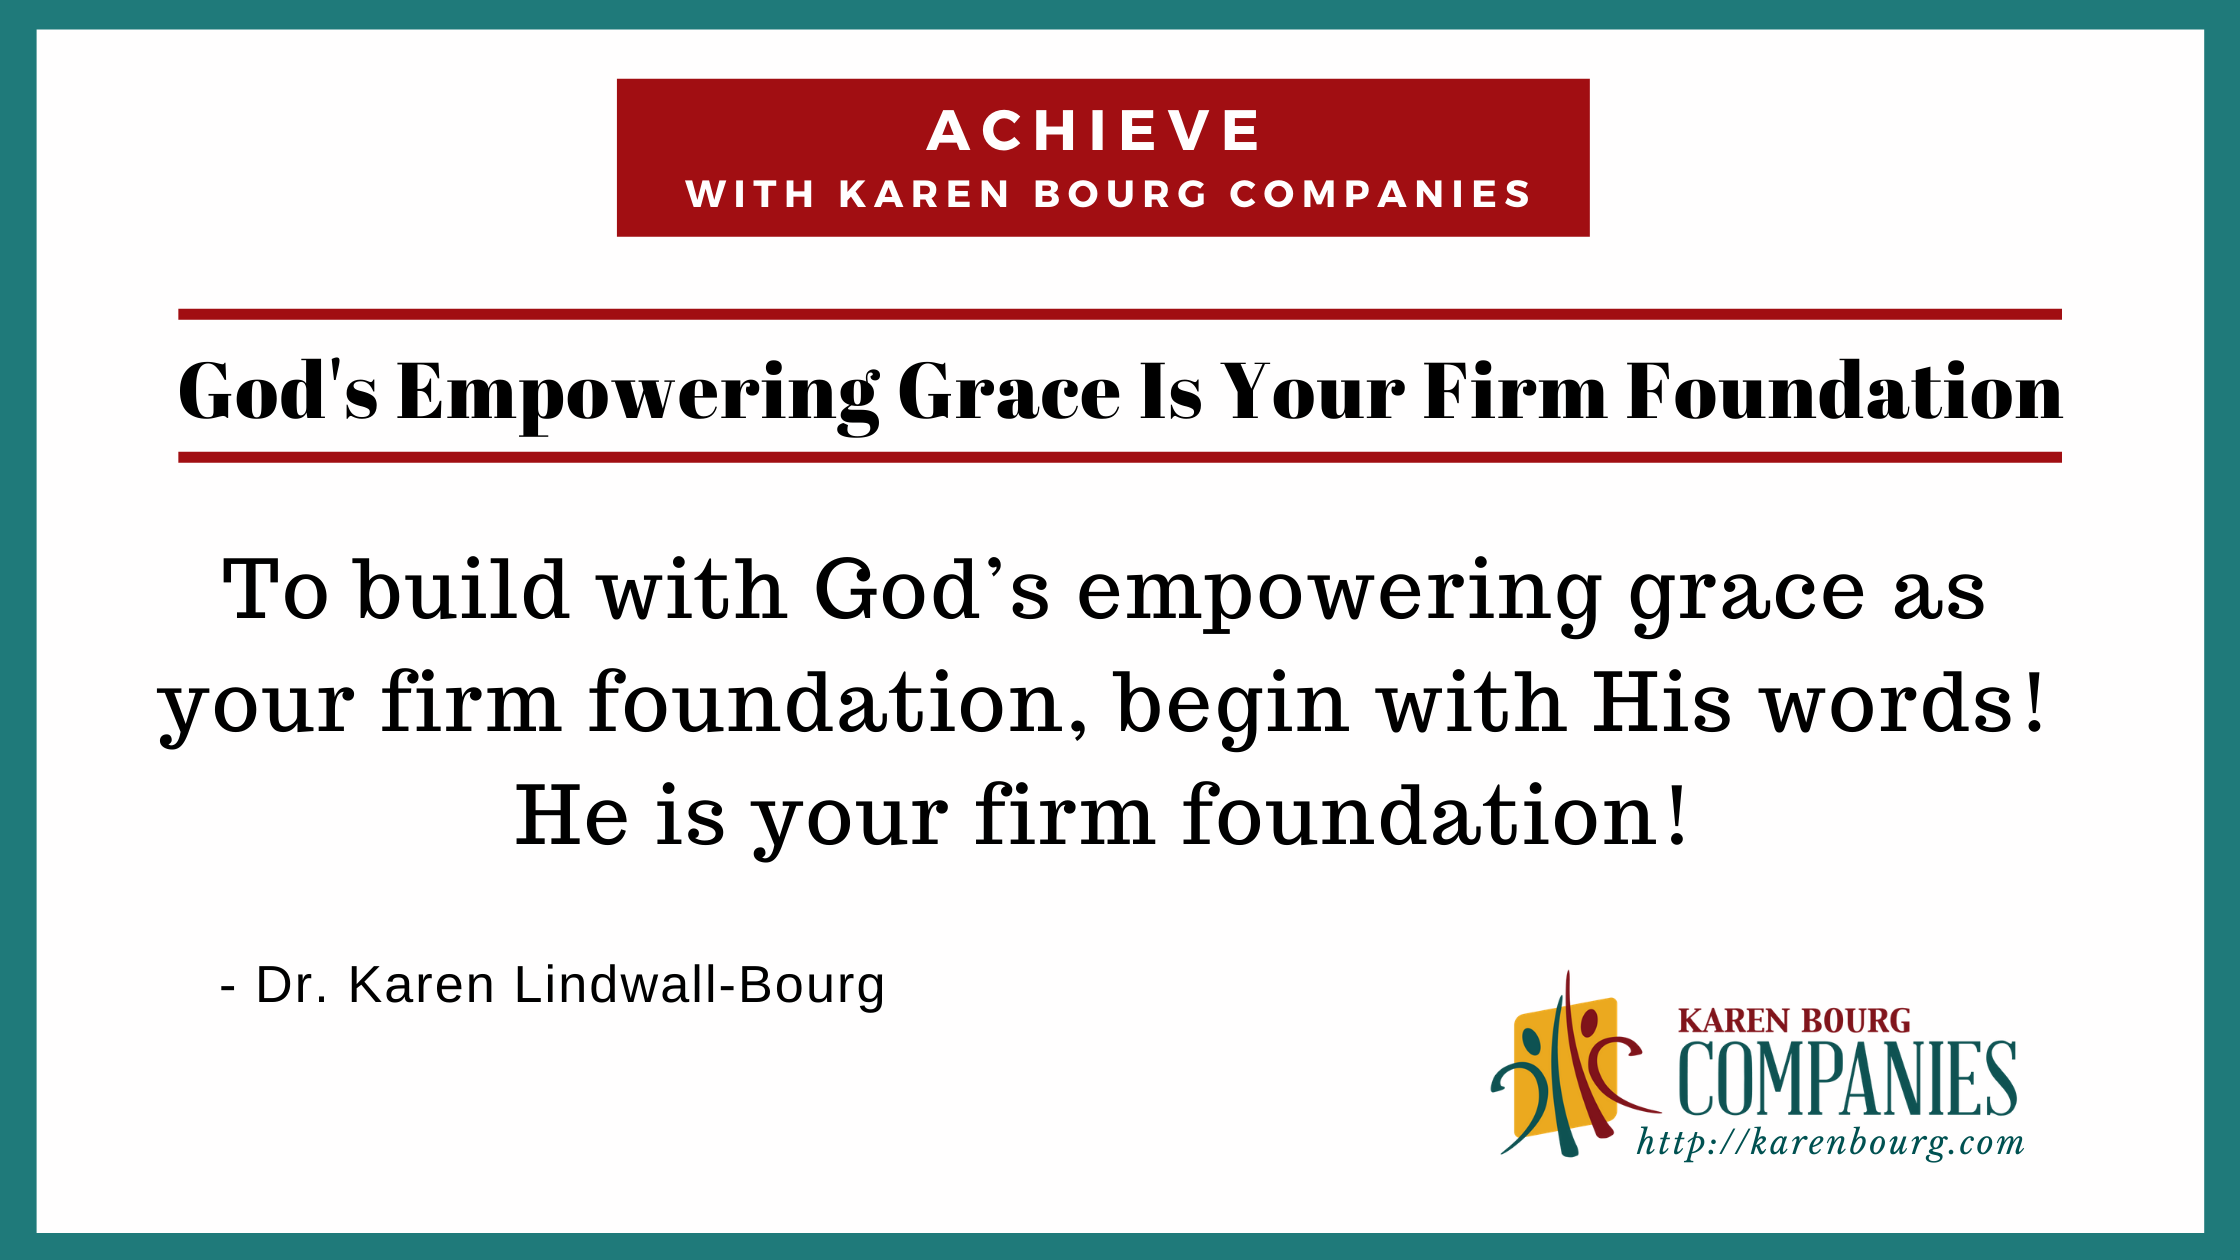 God’s Empowering Grace Is Your Firm Foundation